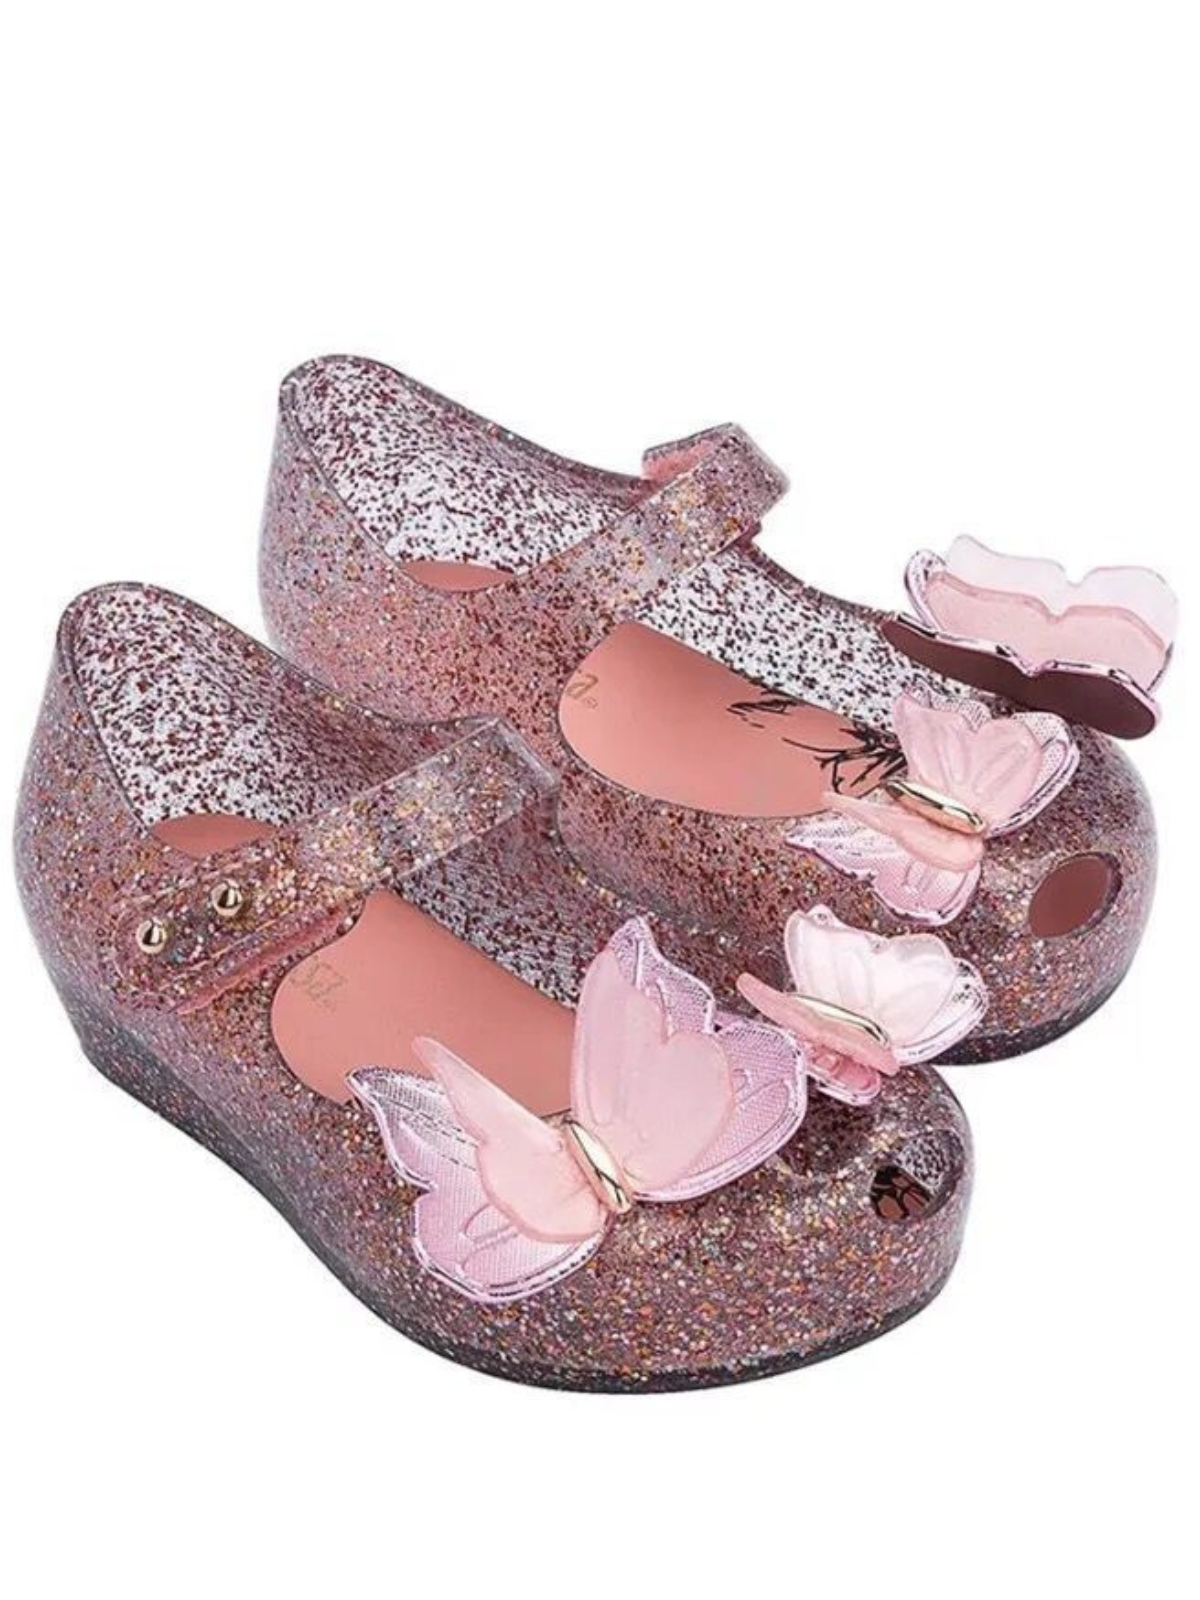 Toddler Shoes By Liv & Mia | Girls Pink Glitter Butterfly Jelly Flats